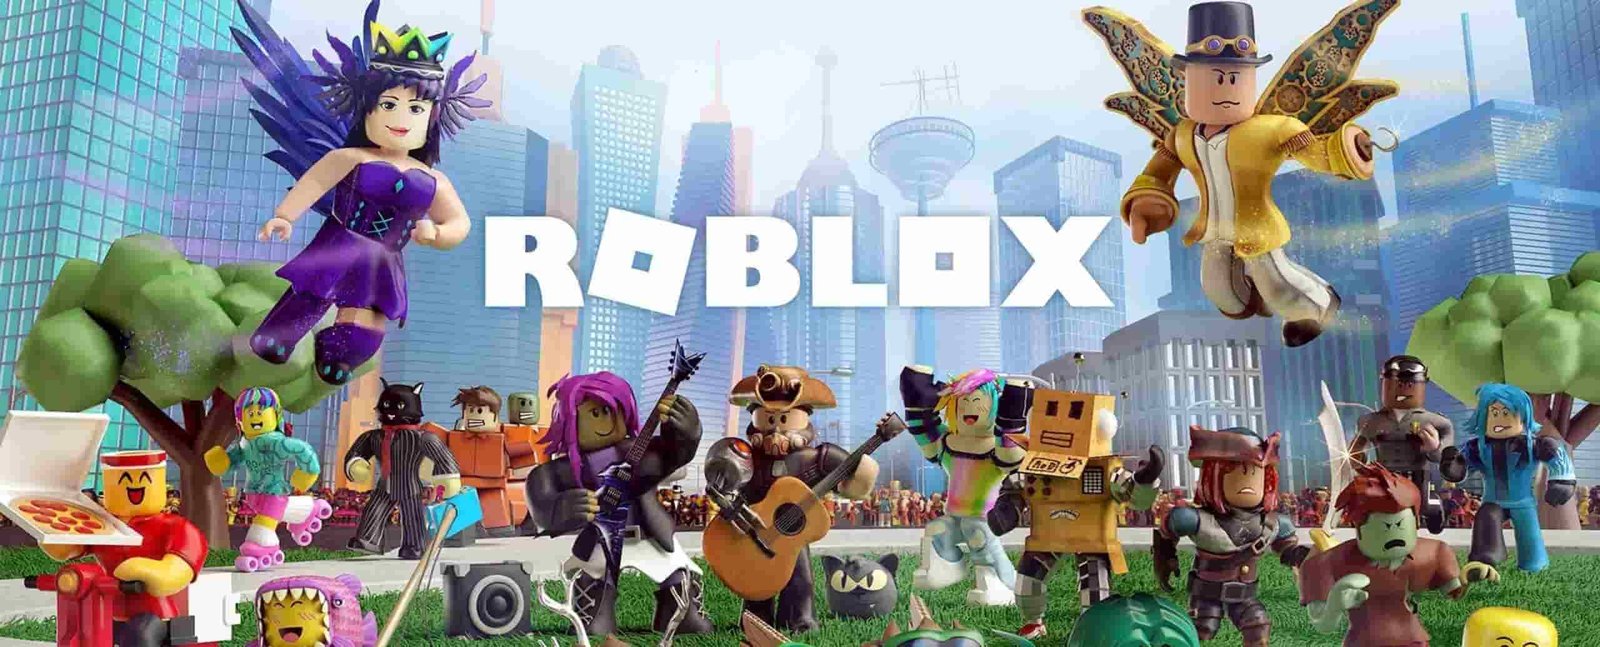 Roblox Voice Chat Feature Might Only Work For 18 Users Suggests Code Digistatement - is roblox adding voice chat